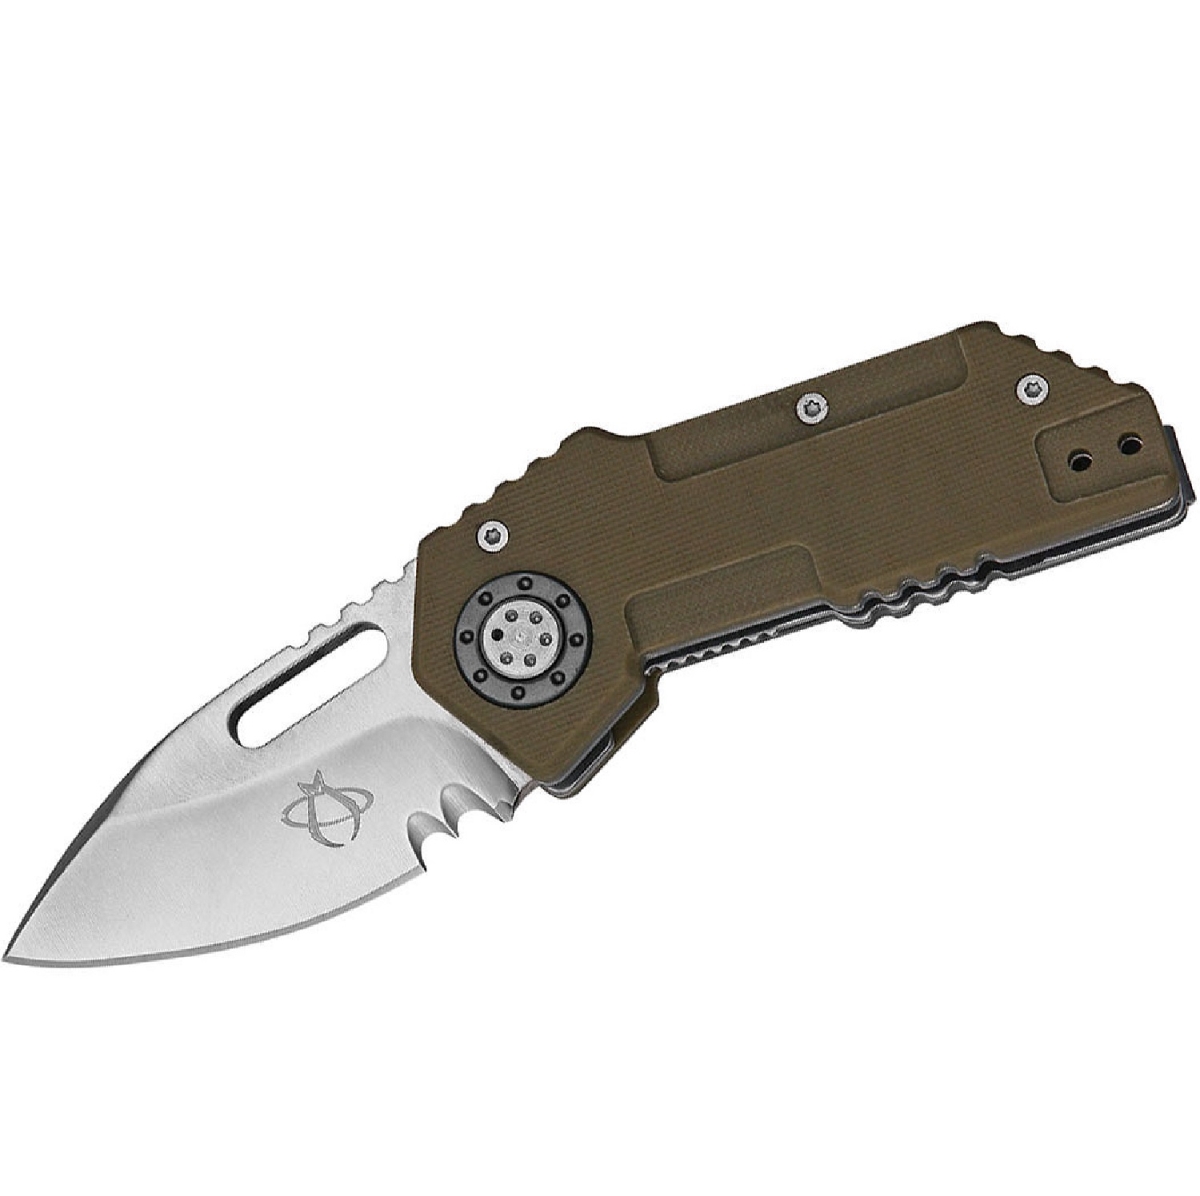 4019463 2.375 In. Wile-e Folder Knife Blade With G10 Handle, Coyote Tan